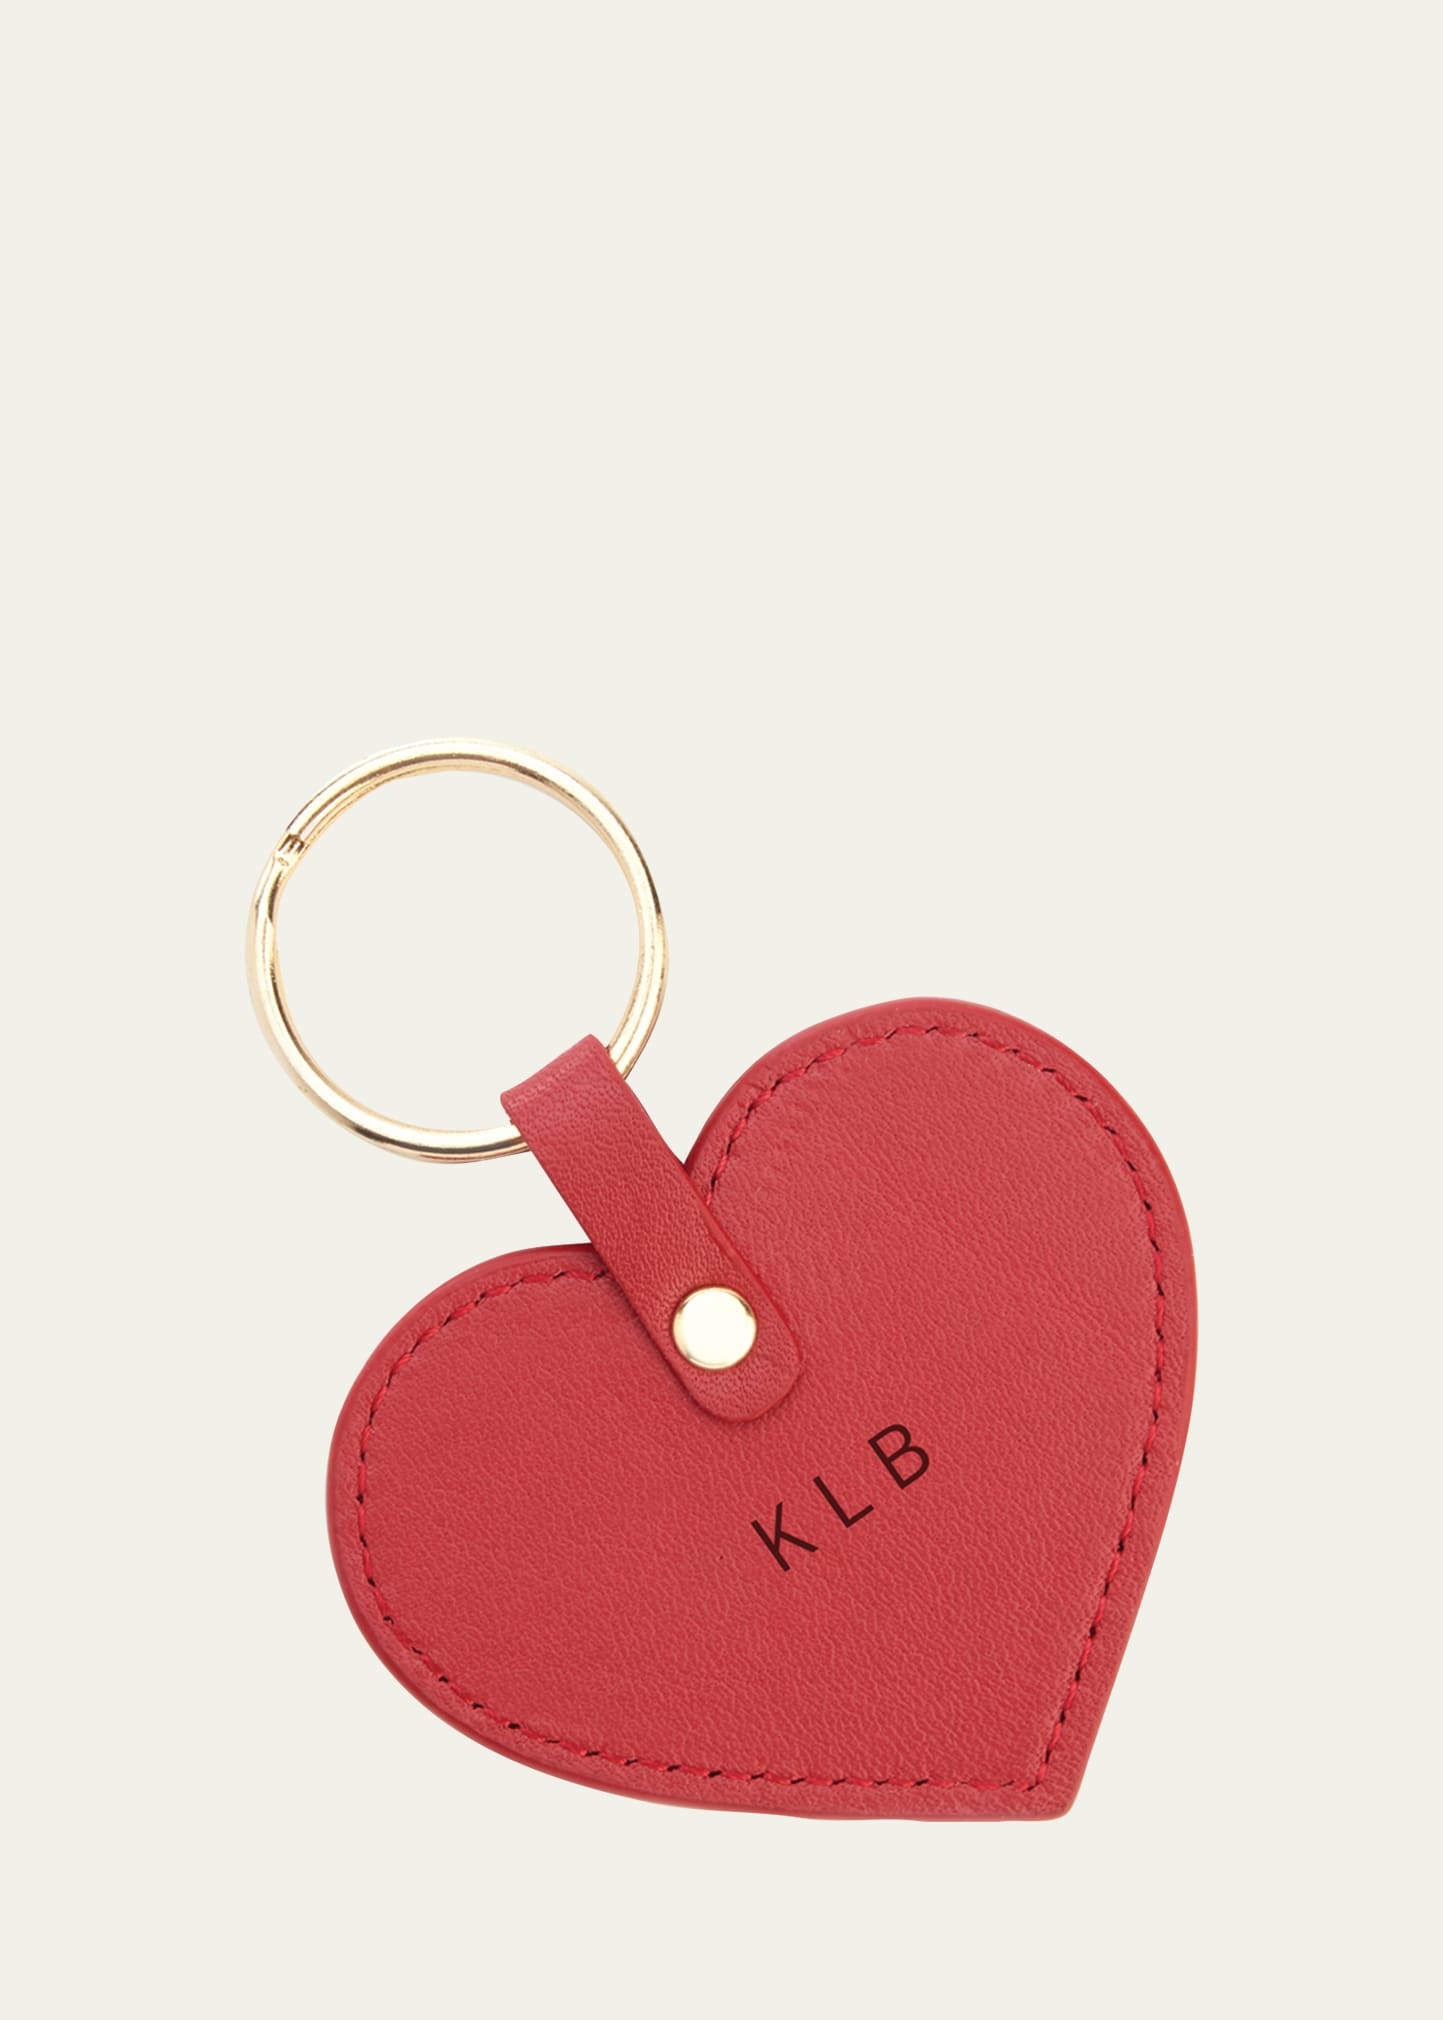 Royce New York Heart Shaped Key Chain In Red